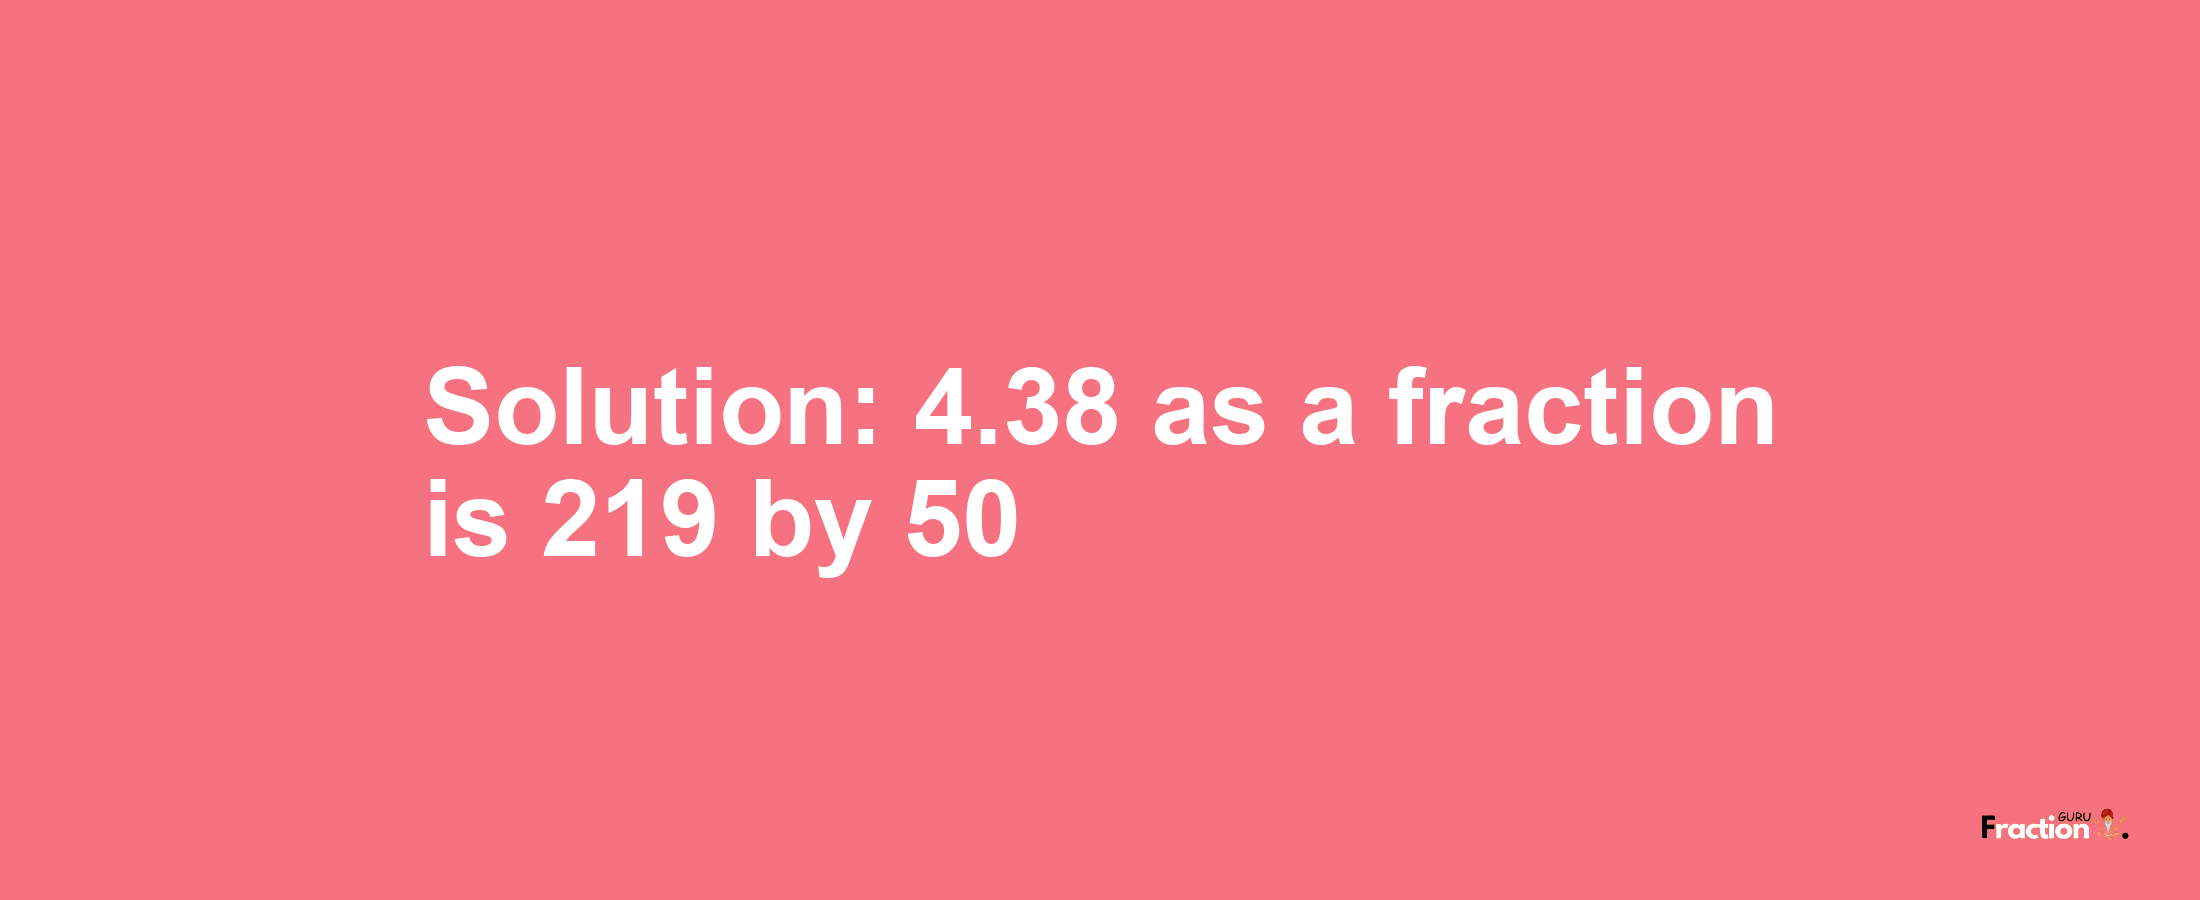 Solution:4.38 as a fraction is 219/50